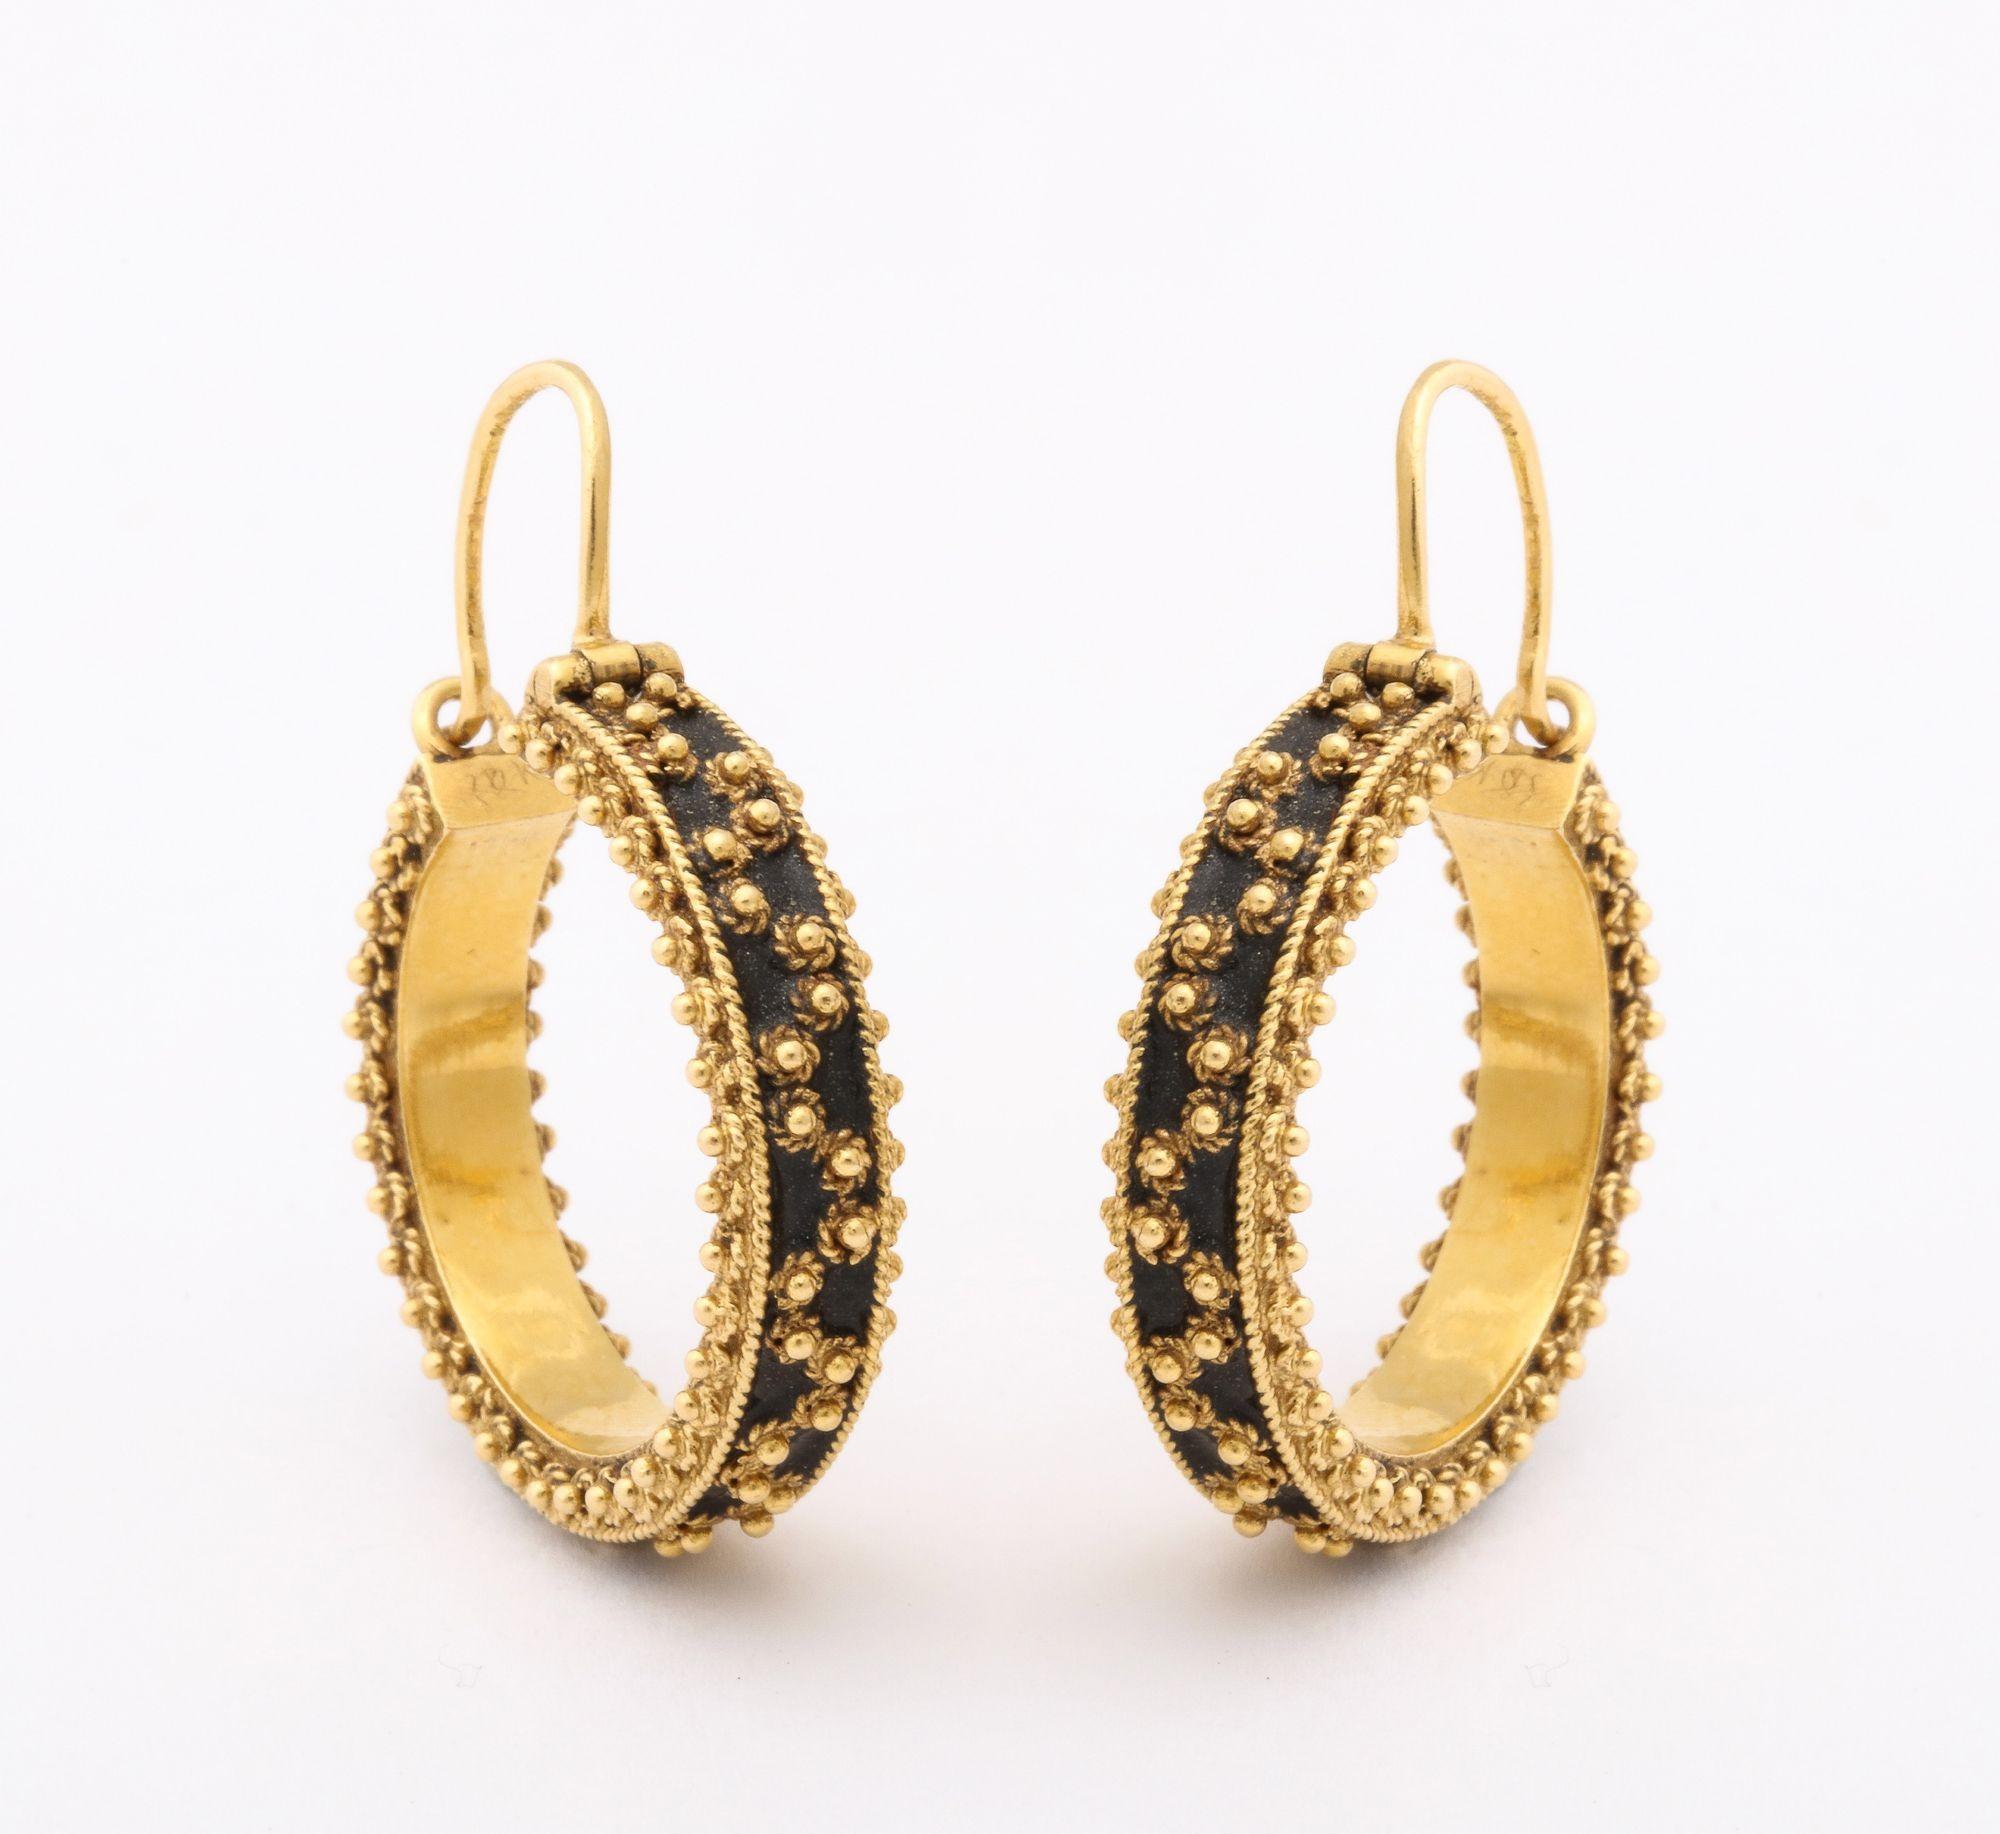 A pair of 18 k Gold Beaded Hoop Earrings with gold beads over ebonized center